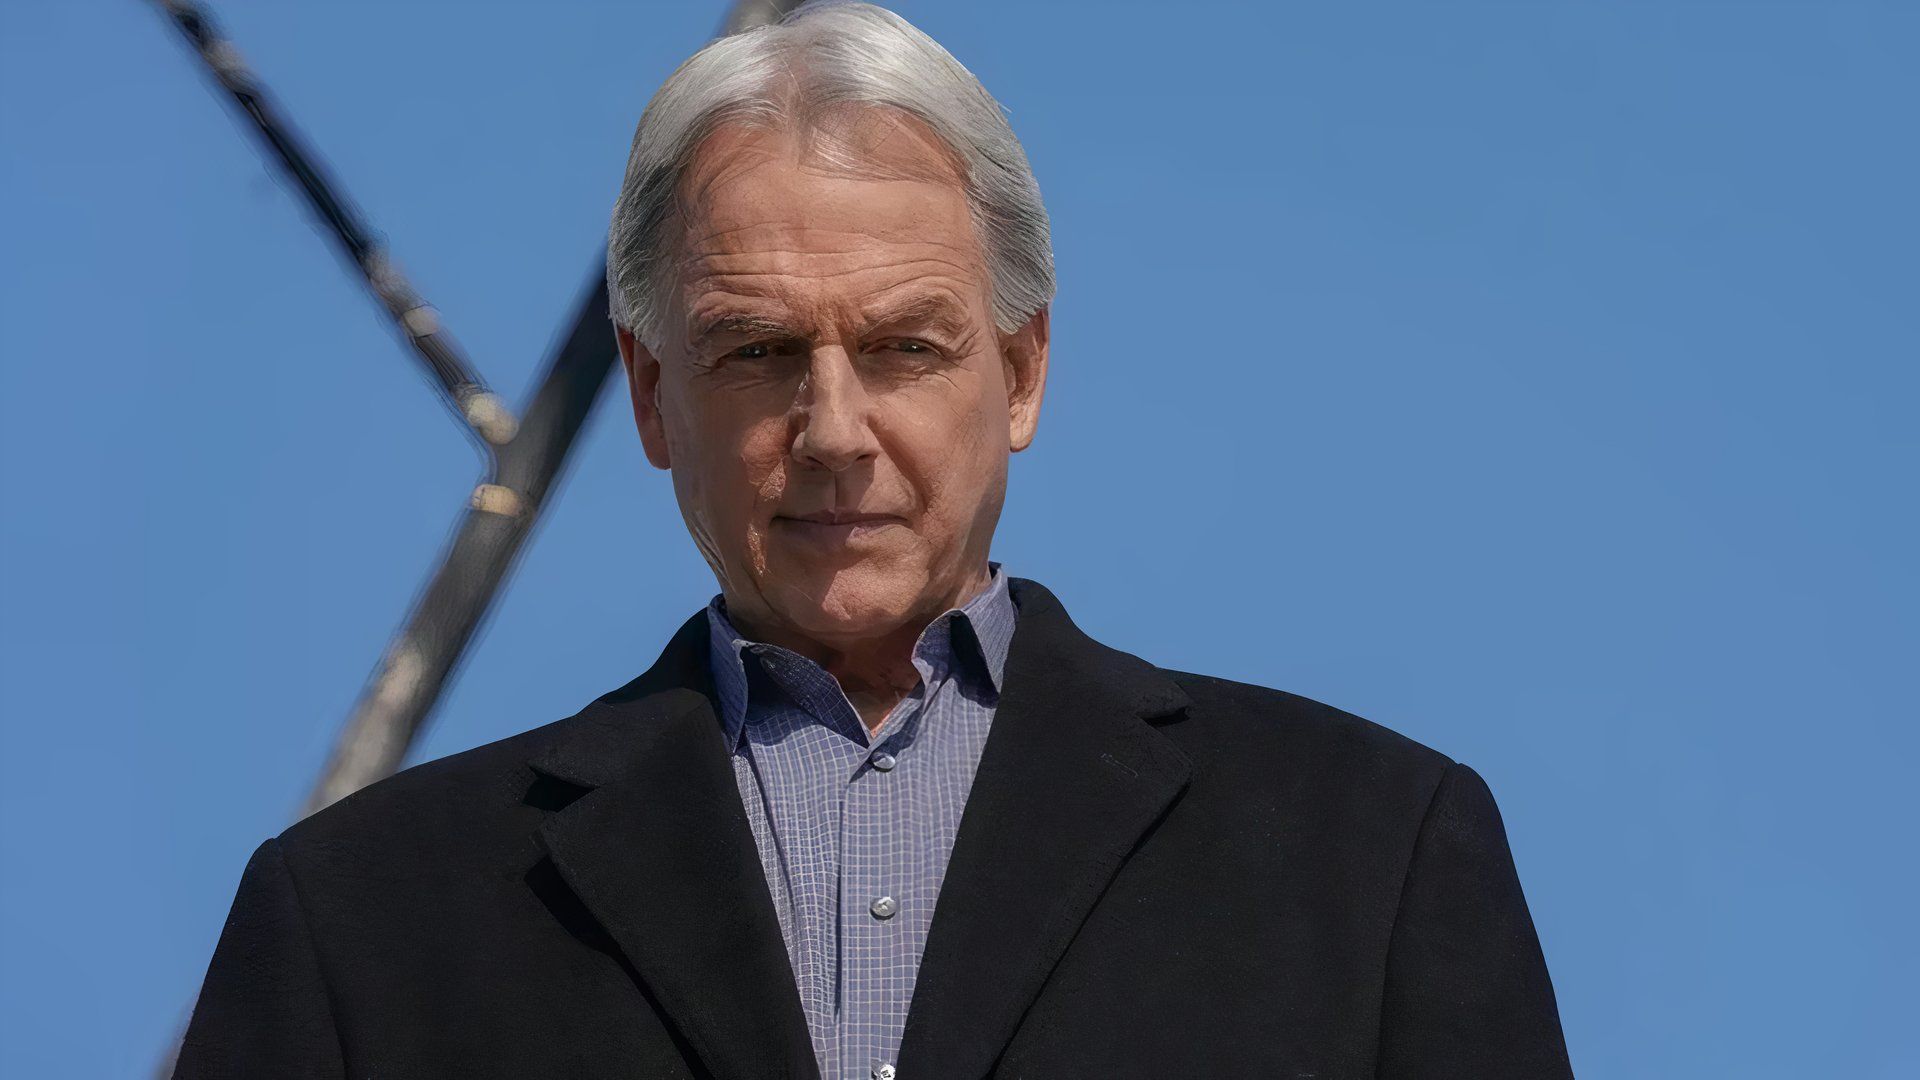 Mark Harmon as Leroy Jethro Gibbs wearing a suit jacket looking down at something off-screen in NCIS (1)